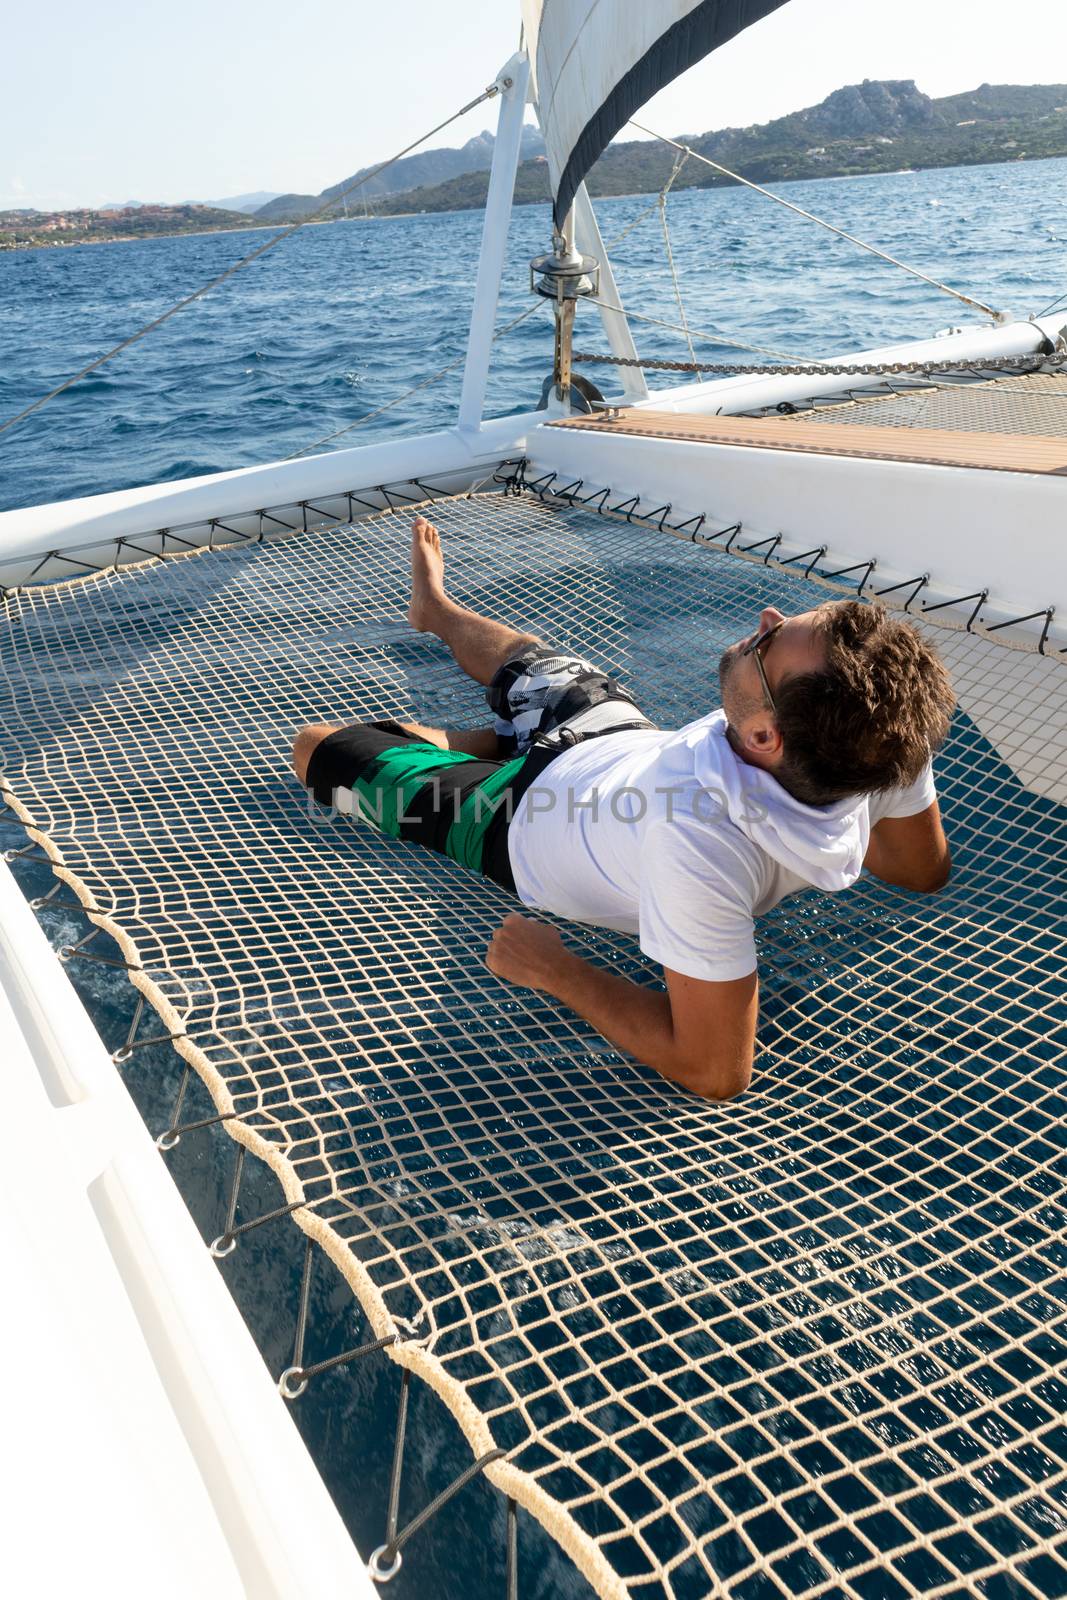 Sporty man relaxing, lying in hammock of a catamaran sailing boat on luxury nautic vacations near picture perfect Palau town, Sardinia, Italy.